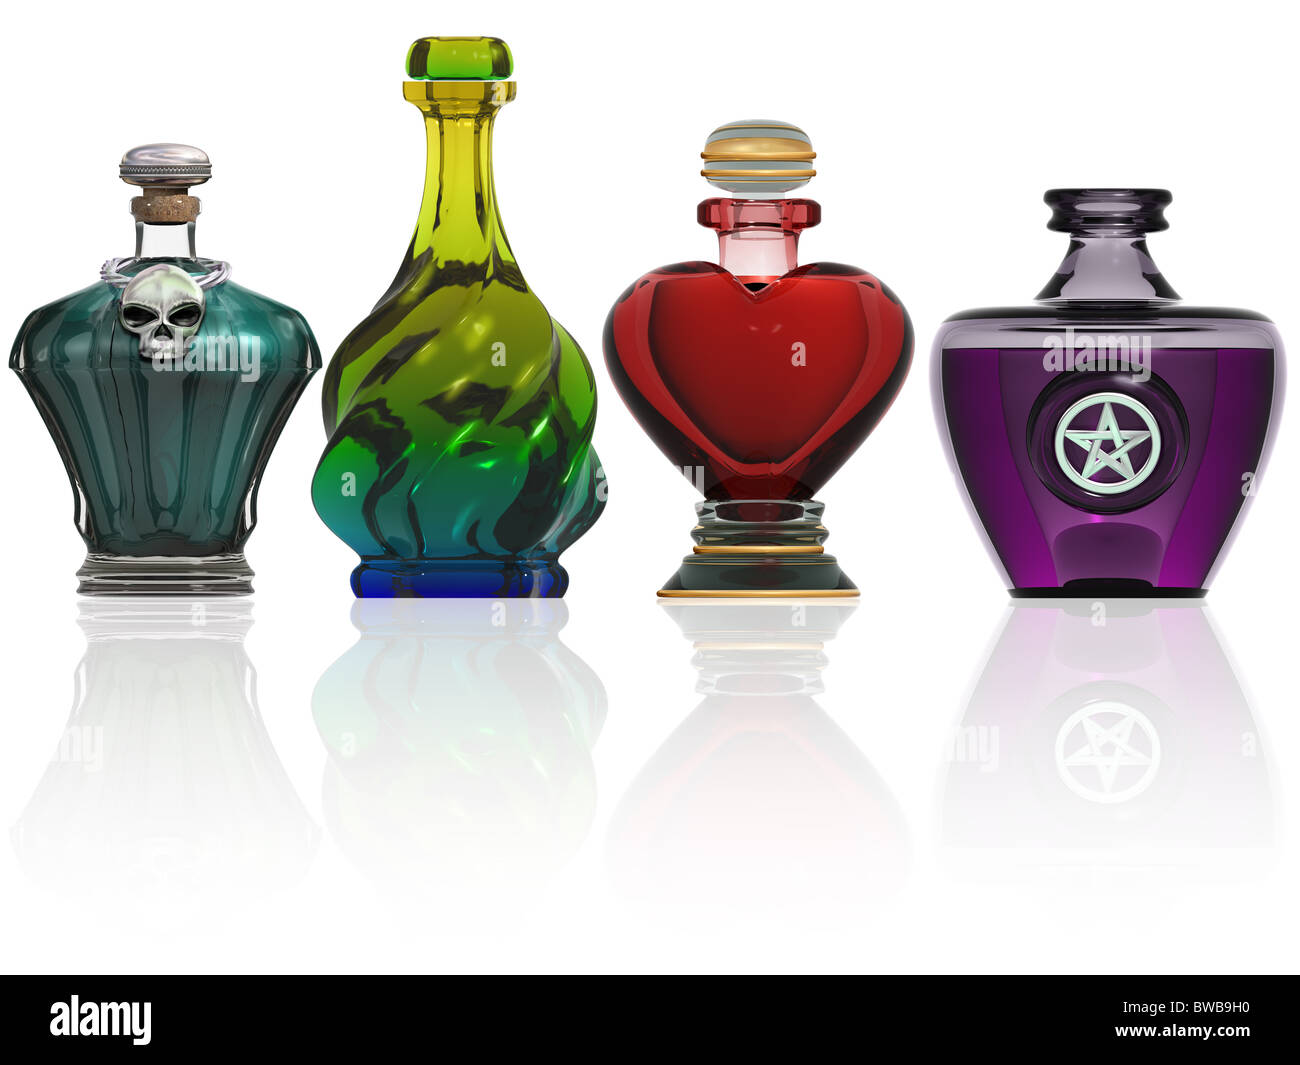 Illustration of various shaped bottles containing magic potions Stock Photo